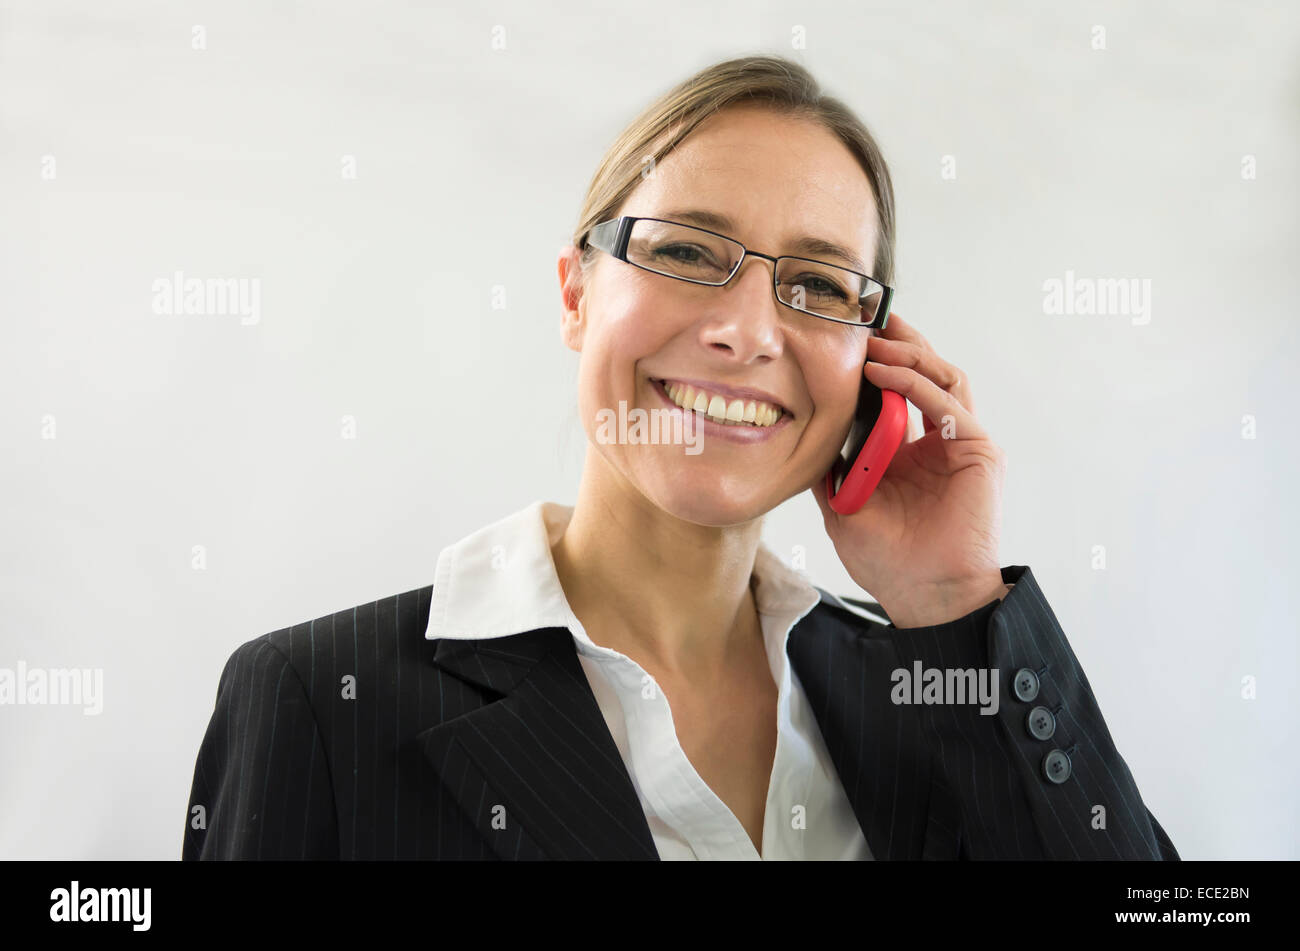 businesswoman in black suit talking on smart phone, smiling Stock Photo